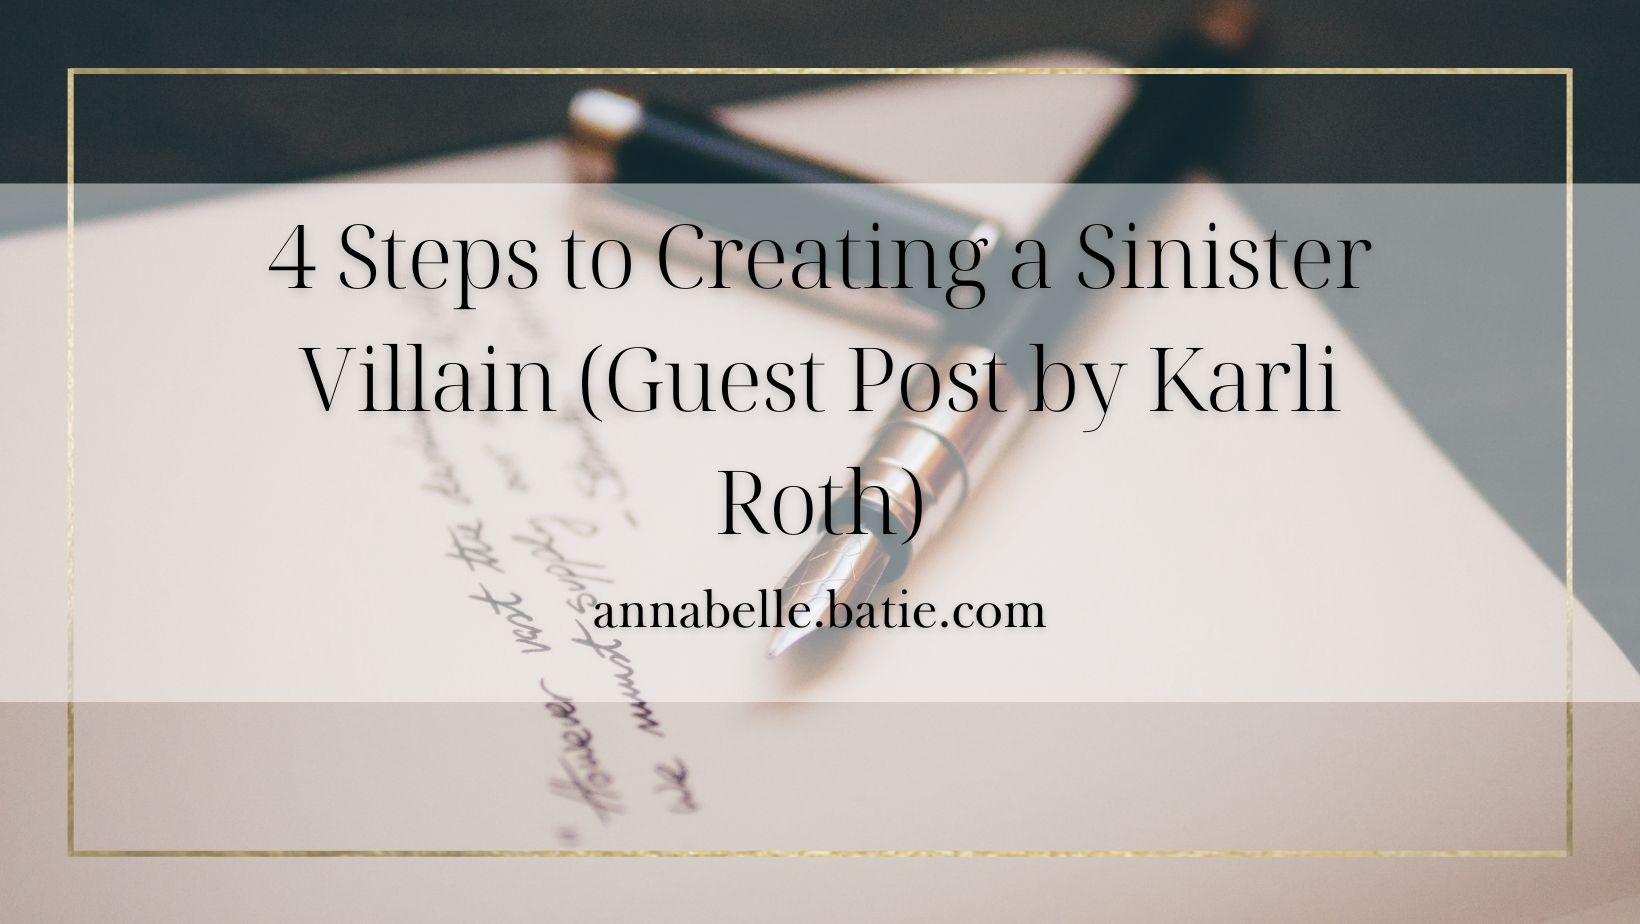 4 Steps to Creating a Sinister Villain (Guest Post by Karli Roth)